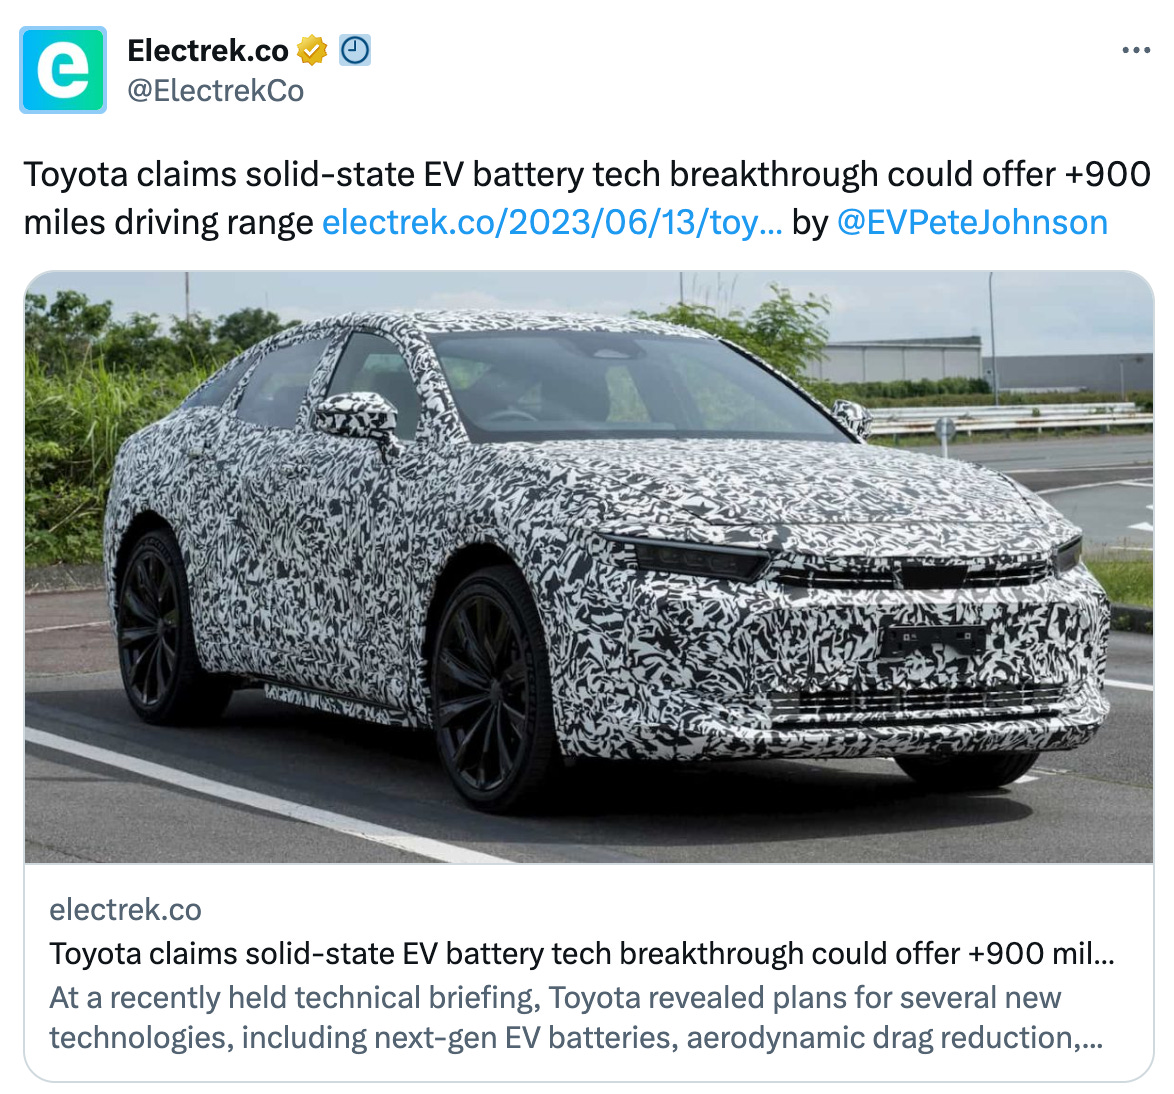  Electrek.co  @ElectrekCo Toyota claims solid-state EV battery tech breakthrough could offer +900 miles driving range https://electrek.co/2023/06/13/toyota-claims-solid-state-ev-battery-tech-breakthrough/ by  @EVPeteJohnson electrek.co Toyota claims solid-state EV battery tech breakthrough could offer +900 miles driving range At a recently held technical briefing, Toyota revealed plans for several new technologies, including next-gen EV batteries, aerodynamic drag reduction,...